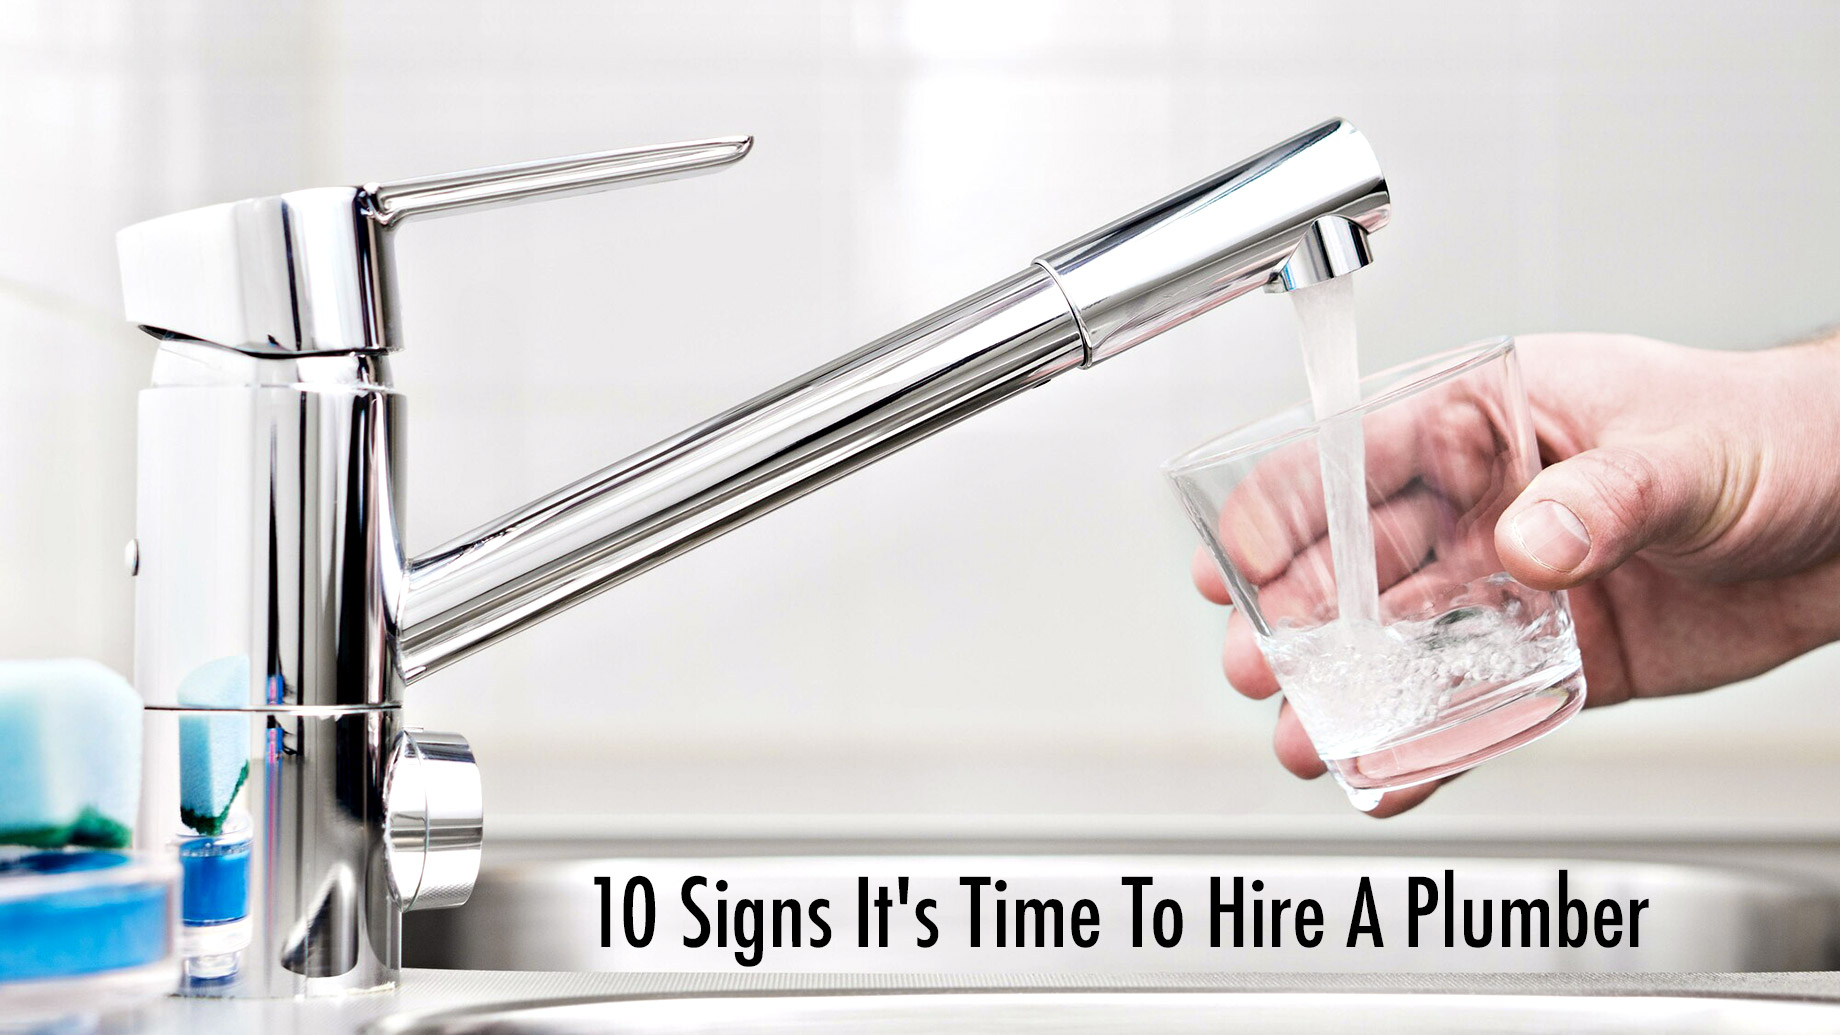 Home Repairs - 10 Signs It's Time To Hire A Plumber